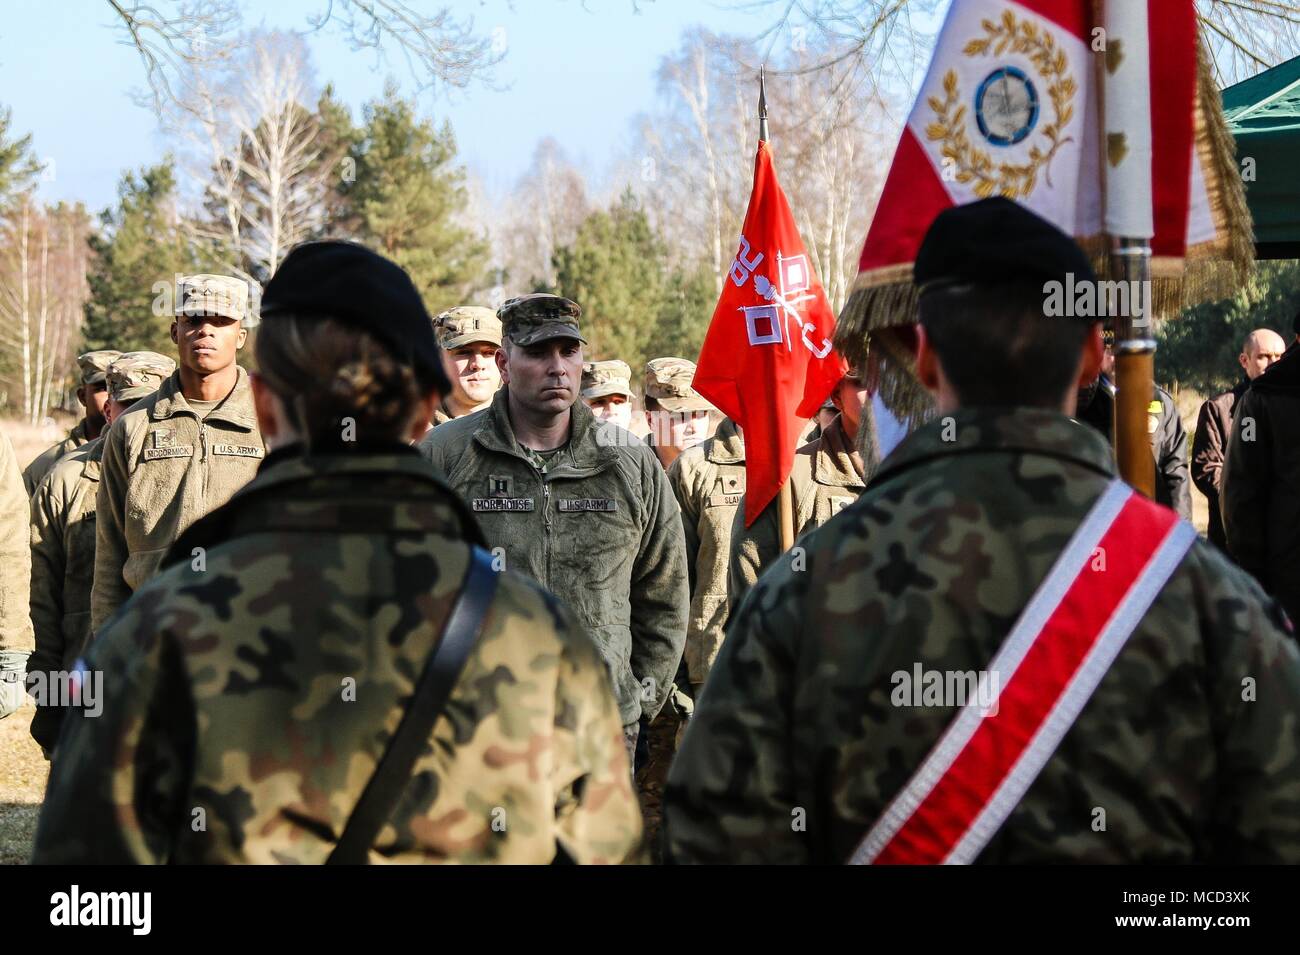 Capt. Jason Morehouse (center), a Moody, Texas native and the commander of Company C, 82nd Brigade Engineer Battalion, 2nd Armored Brigade Combat Team, 1st Infantry Division, stands at attention in front of his Soldiers during a ceremony in honor of the 73rd anniversary of the Battle of Zagan outside of the Stalag Luft III Prisoner Camp Museum in Zagan, Poland on Feb. 16, 2018. The U.S. Soldiers attended the event to strengthen Polish-American relationships during their deployment in support of Atlantic Resolve and to learn about the history of the community in which they serve. (U.S. Army pho Stock Photo